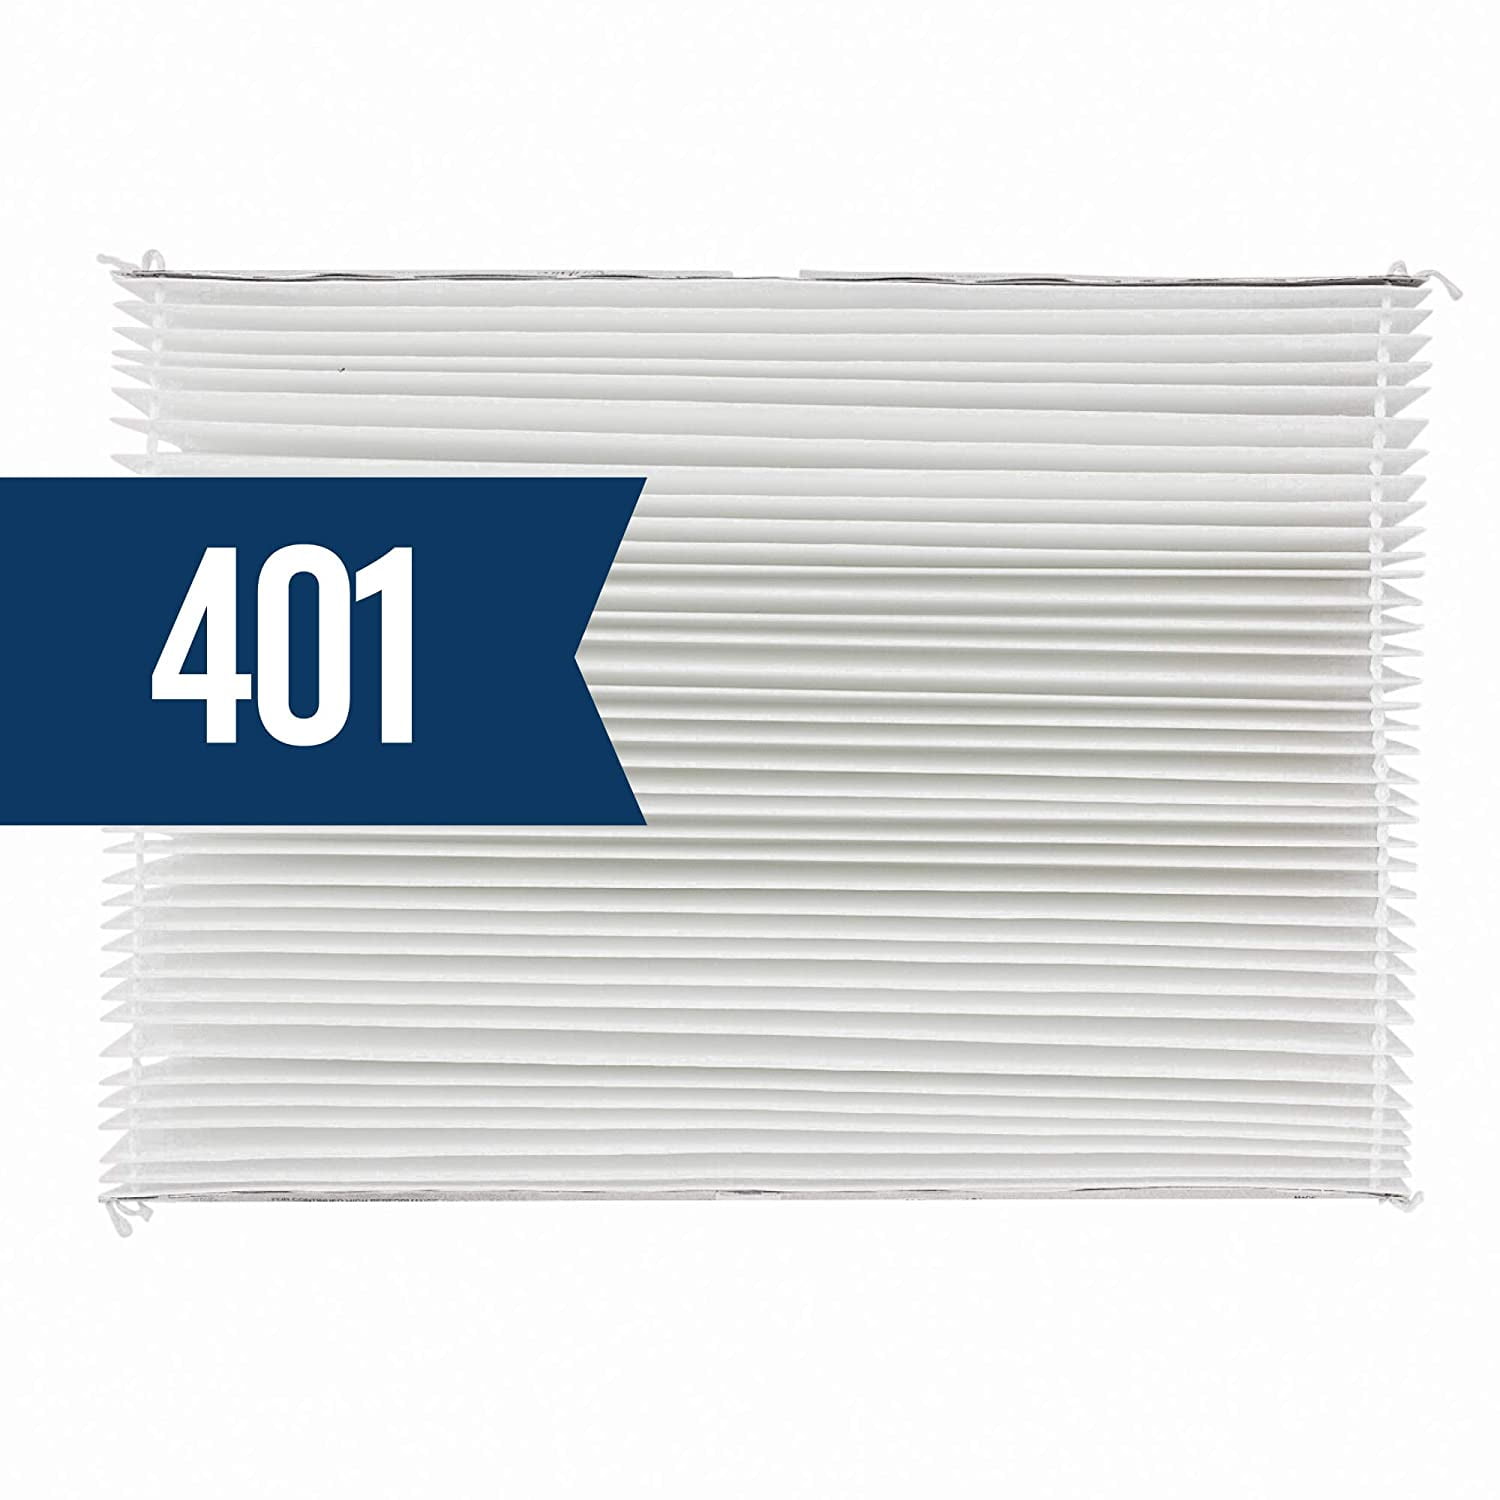 2 Replacement Filters For Aprilaire 401 SpaceGard 2400 